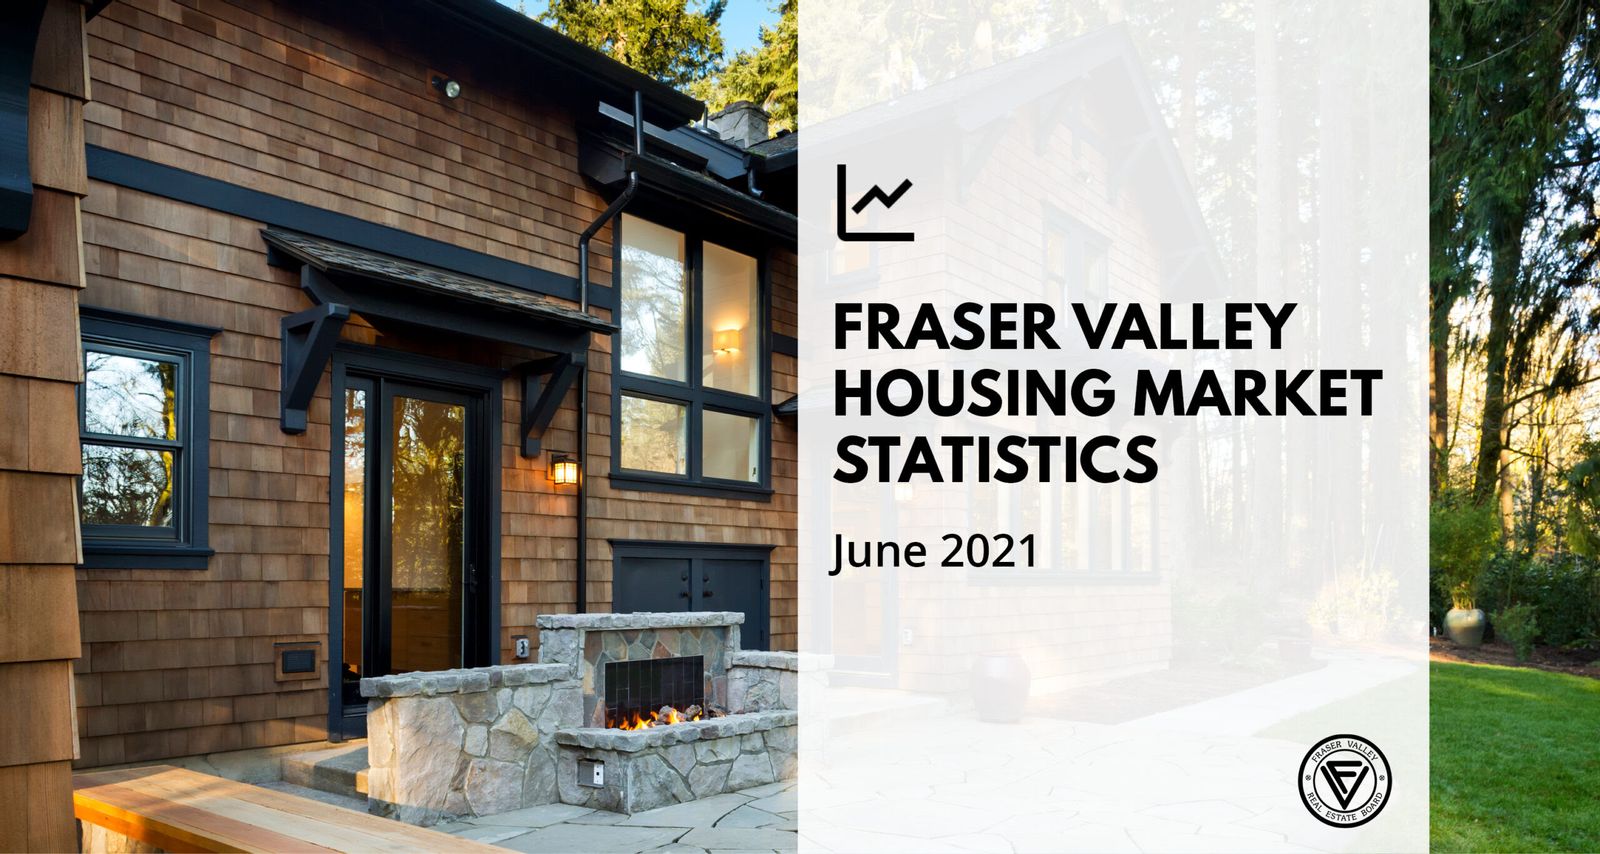 Mirroring the weather, Fraser Valley’s hot housing market cooled slightly in June going from a boil to a simmer